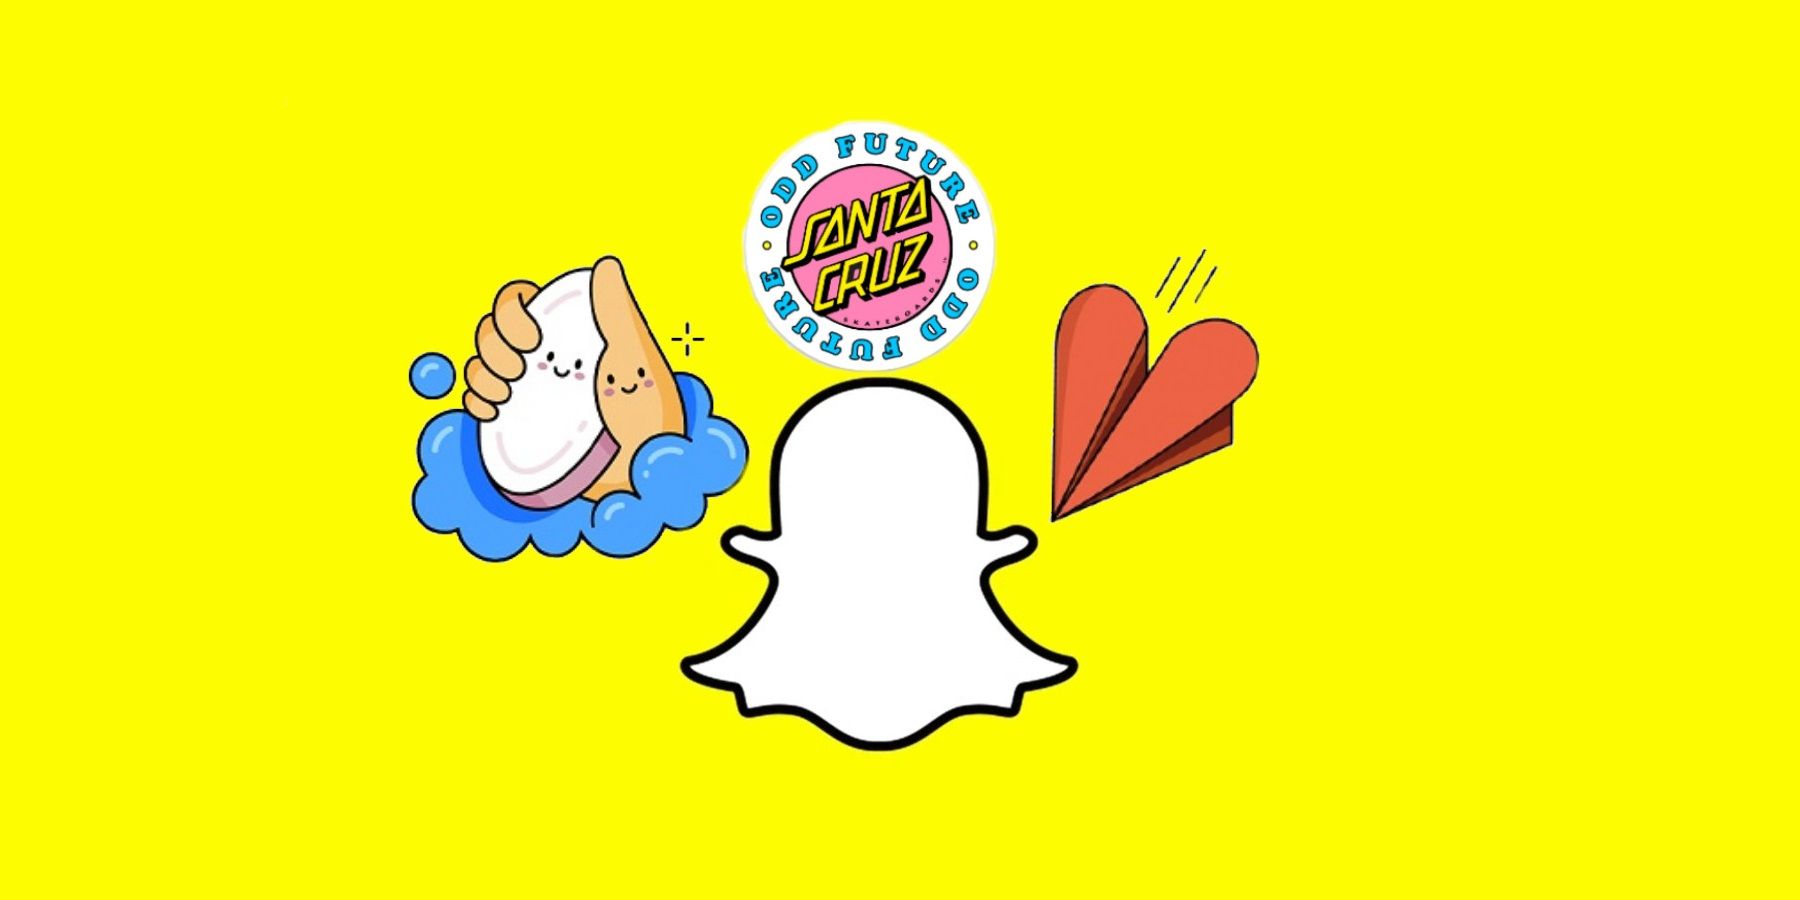 Snap stickers